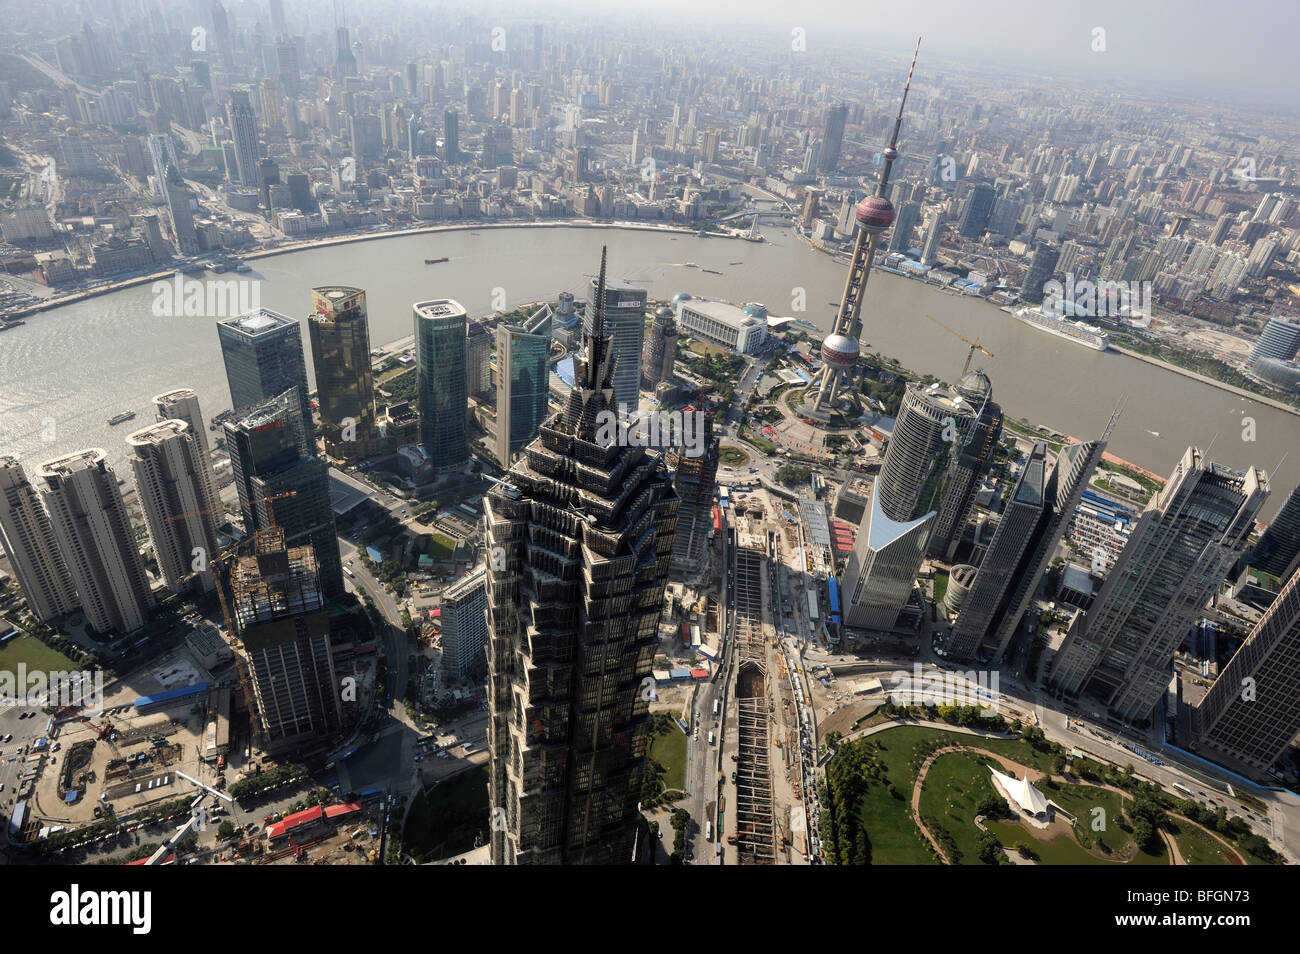 Skyline of Pudong commercial district, Shanghai, China. 14-Oct-2009 Stock Photo